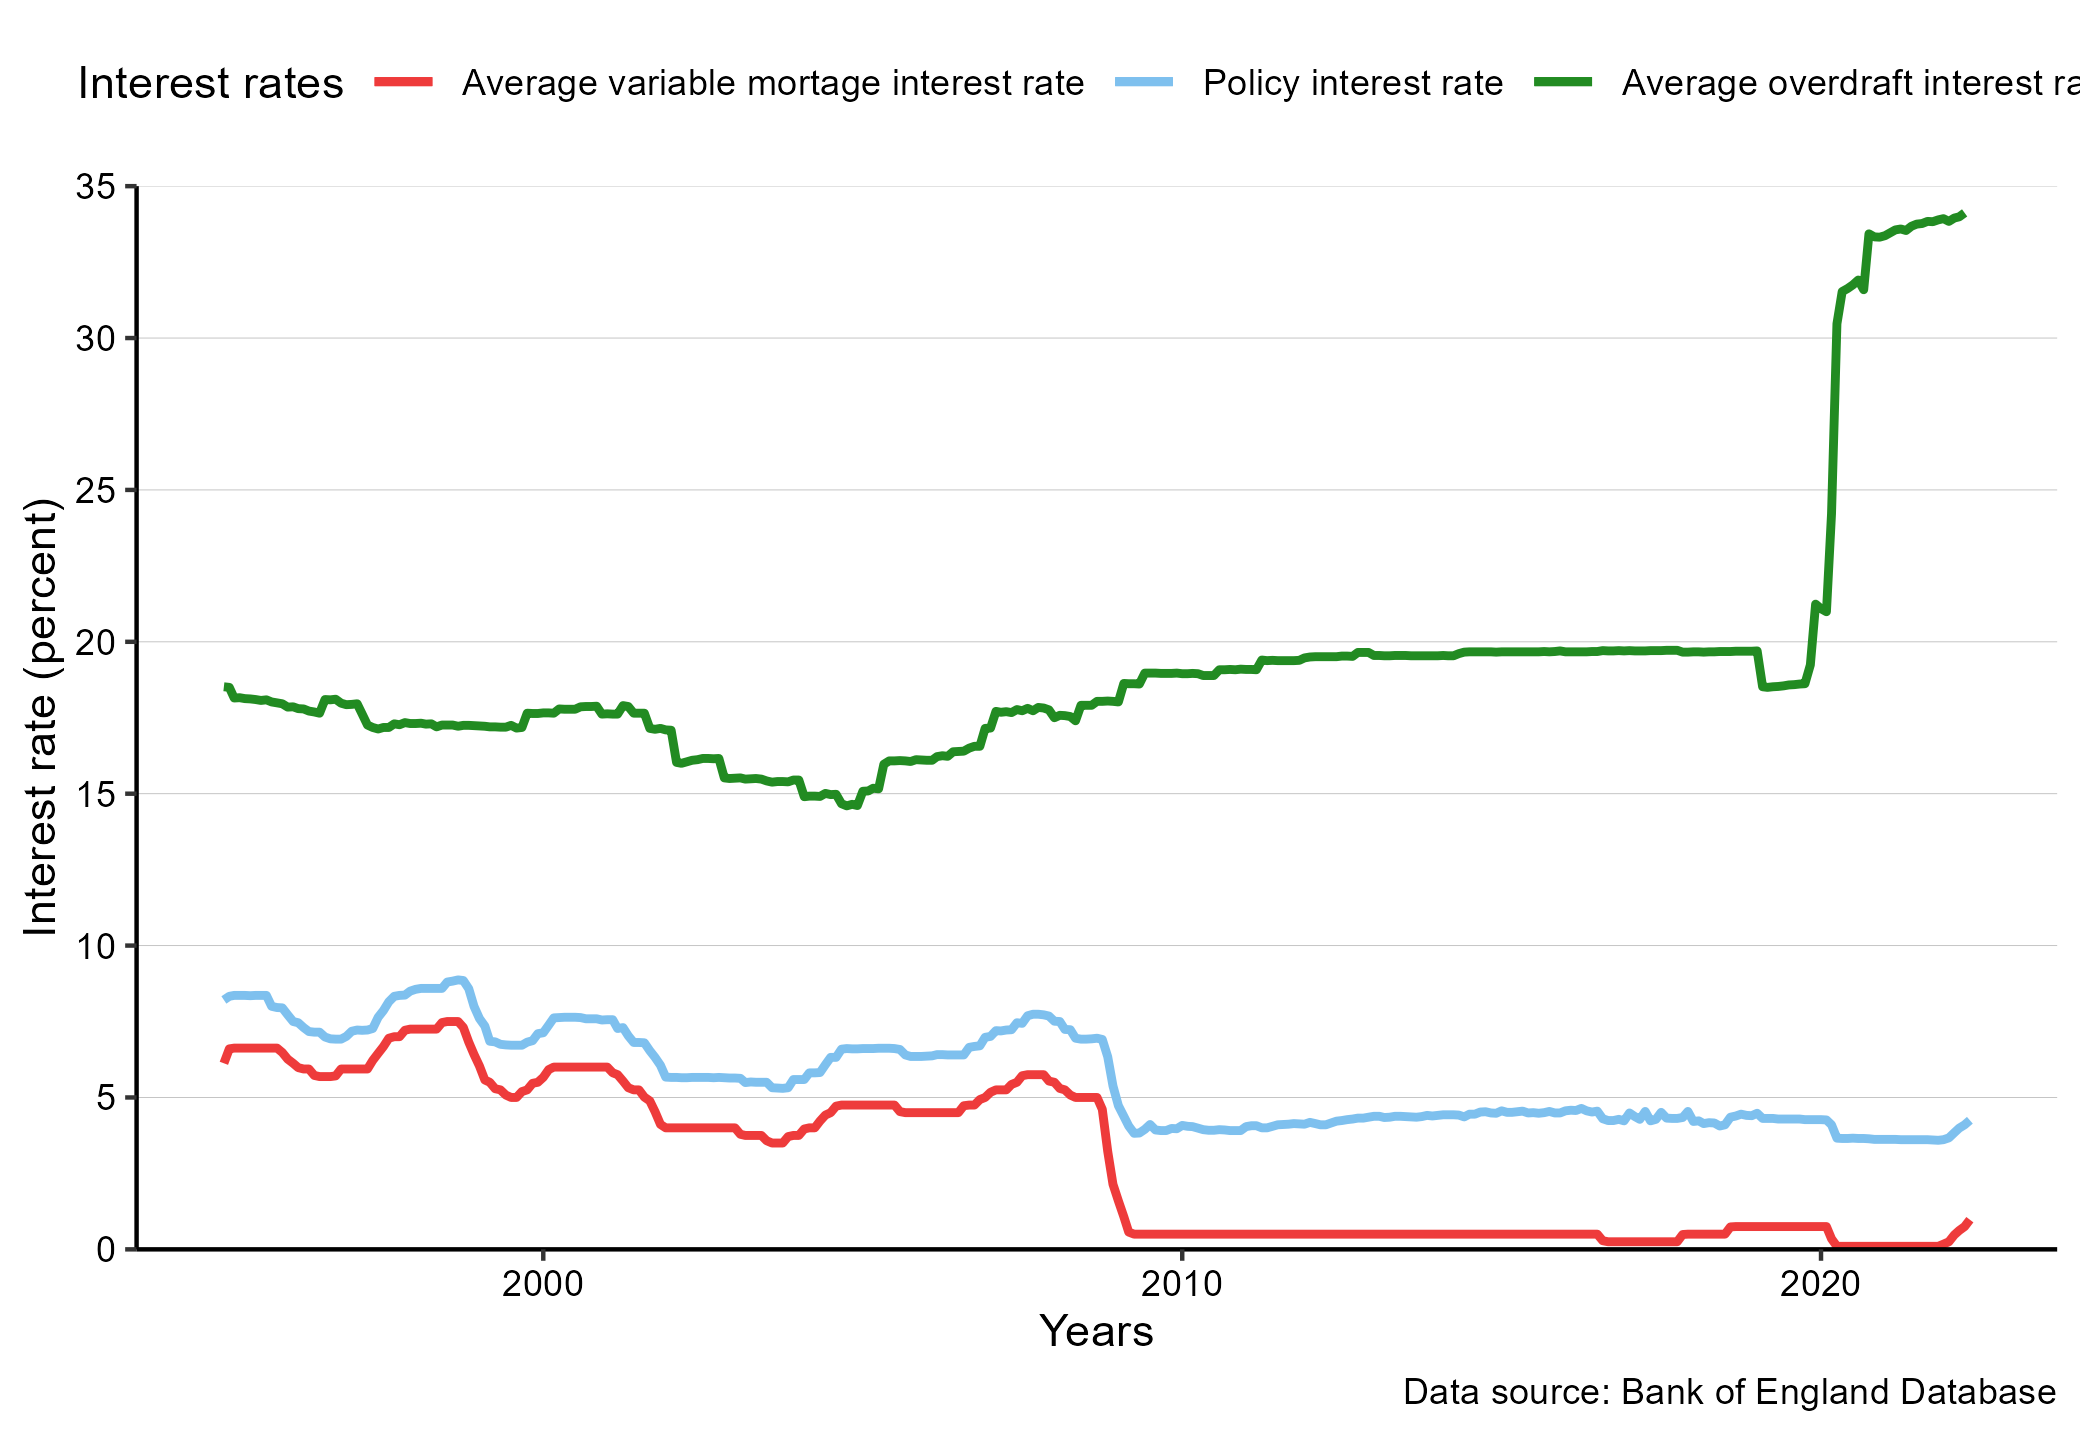 The policy interest rate, the  bank interest rate (mortgages) for the UK and the overdraft interest rates. Source: Bank of England. Series: IUMABEDR, IUMODTL and IUMTLMV..